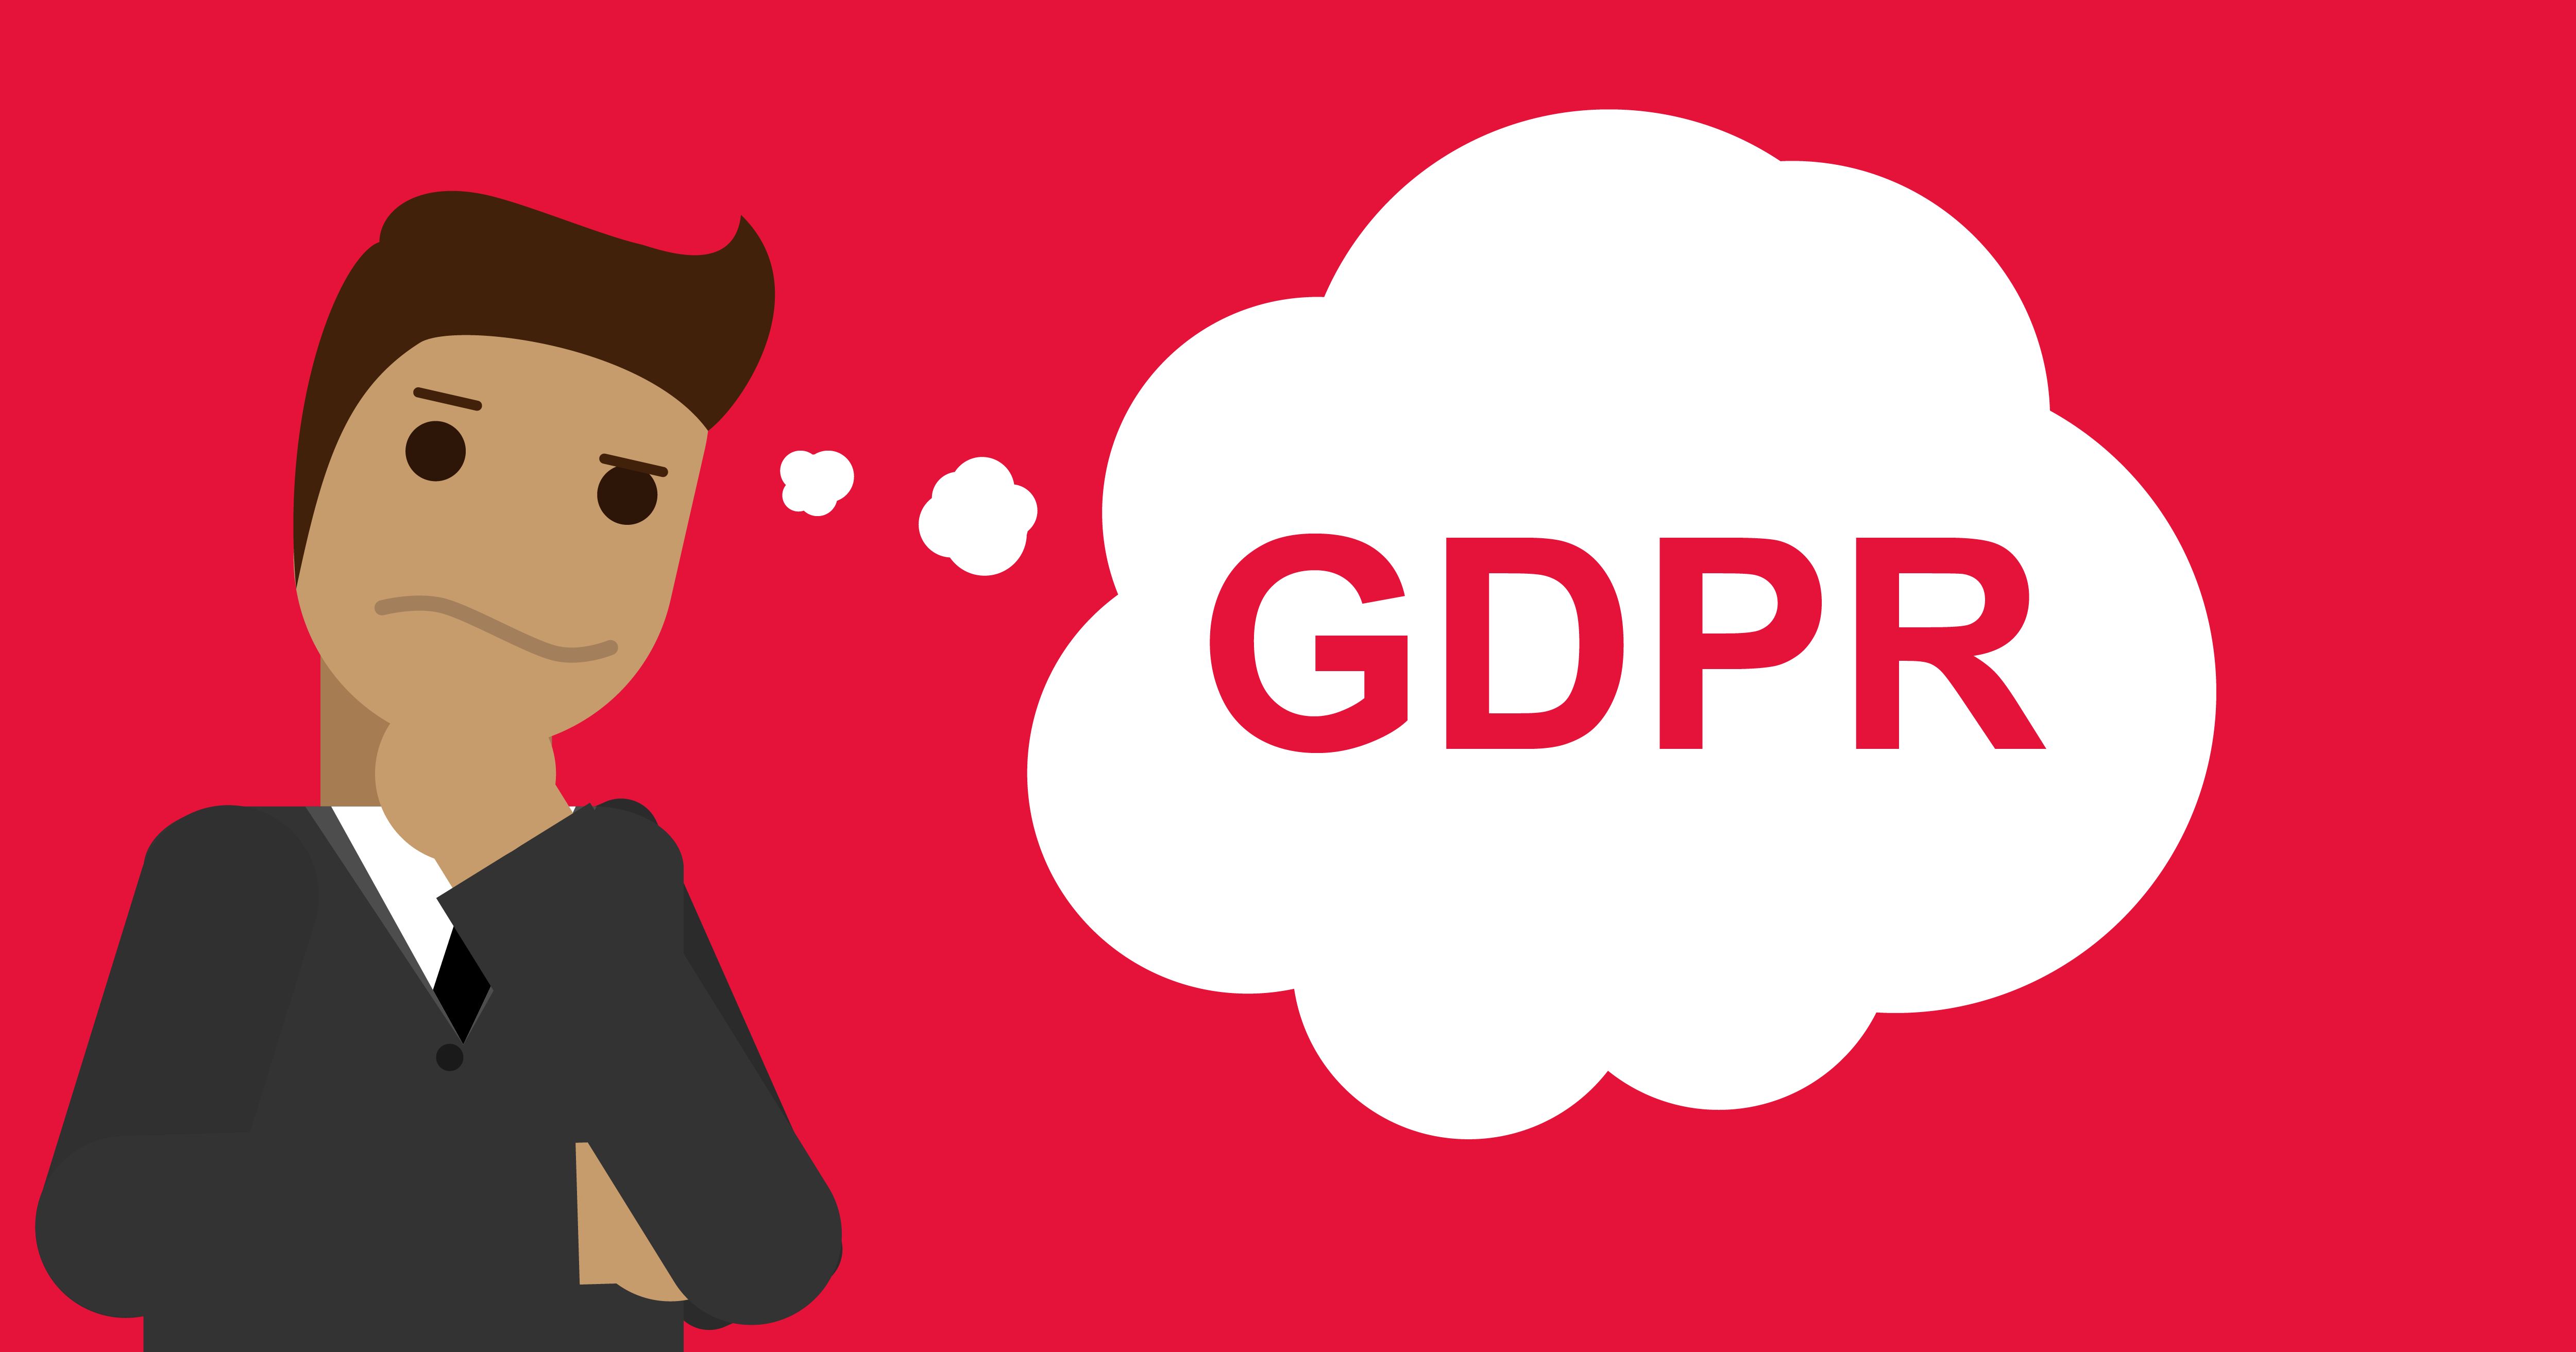 GDPR meaning